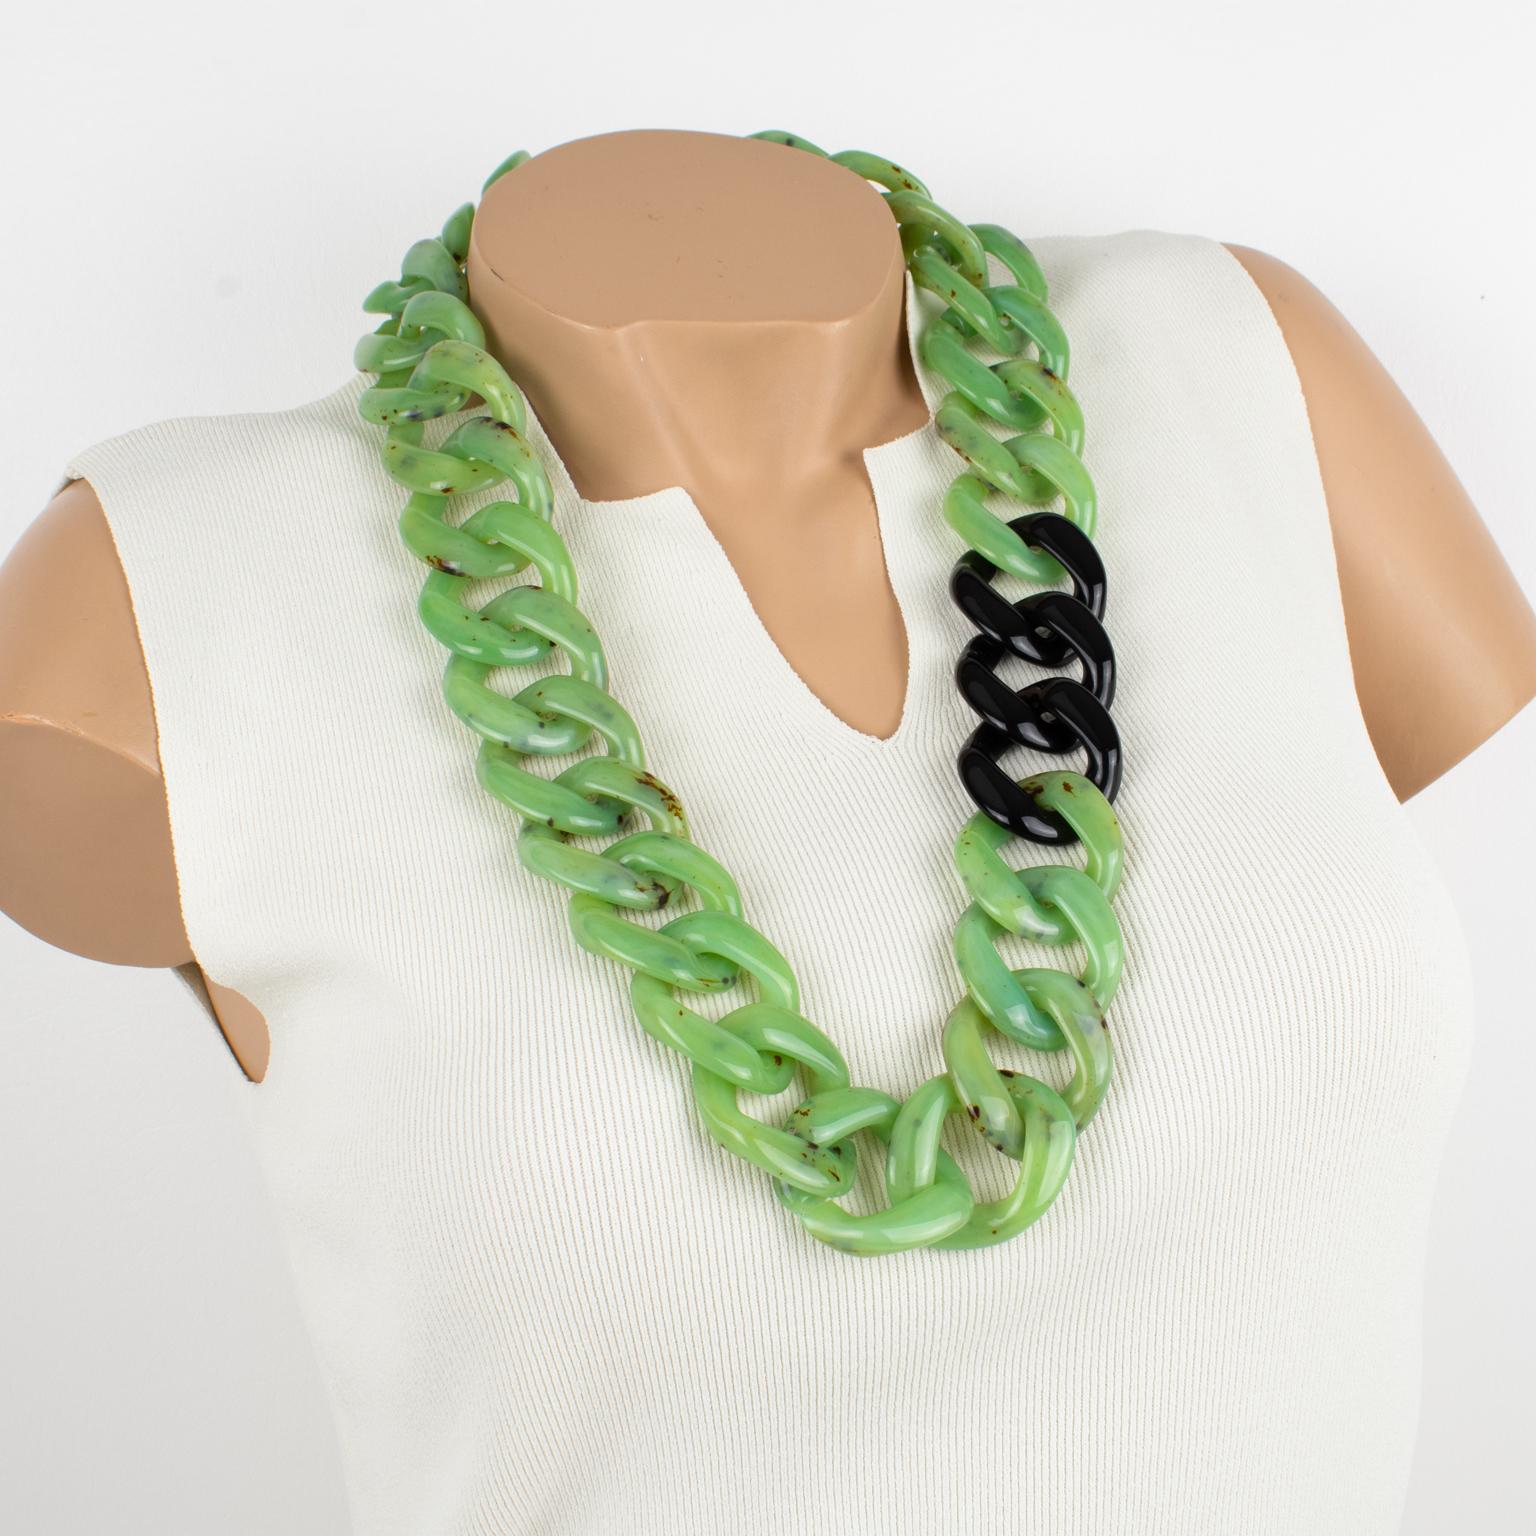 This lovely Angela Caputi, made-in-It Italy long necklace features an extra-large flat resin chain design in green marble color with a black contrast. Her matching of colors is always bold and classy.
As you know, Caputi jewelry is not signed. This